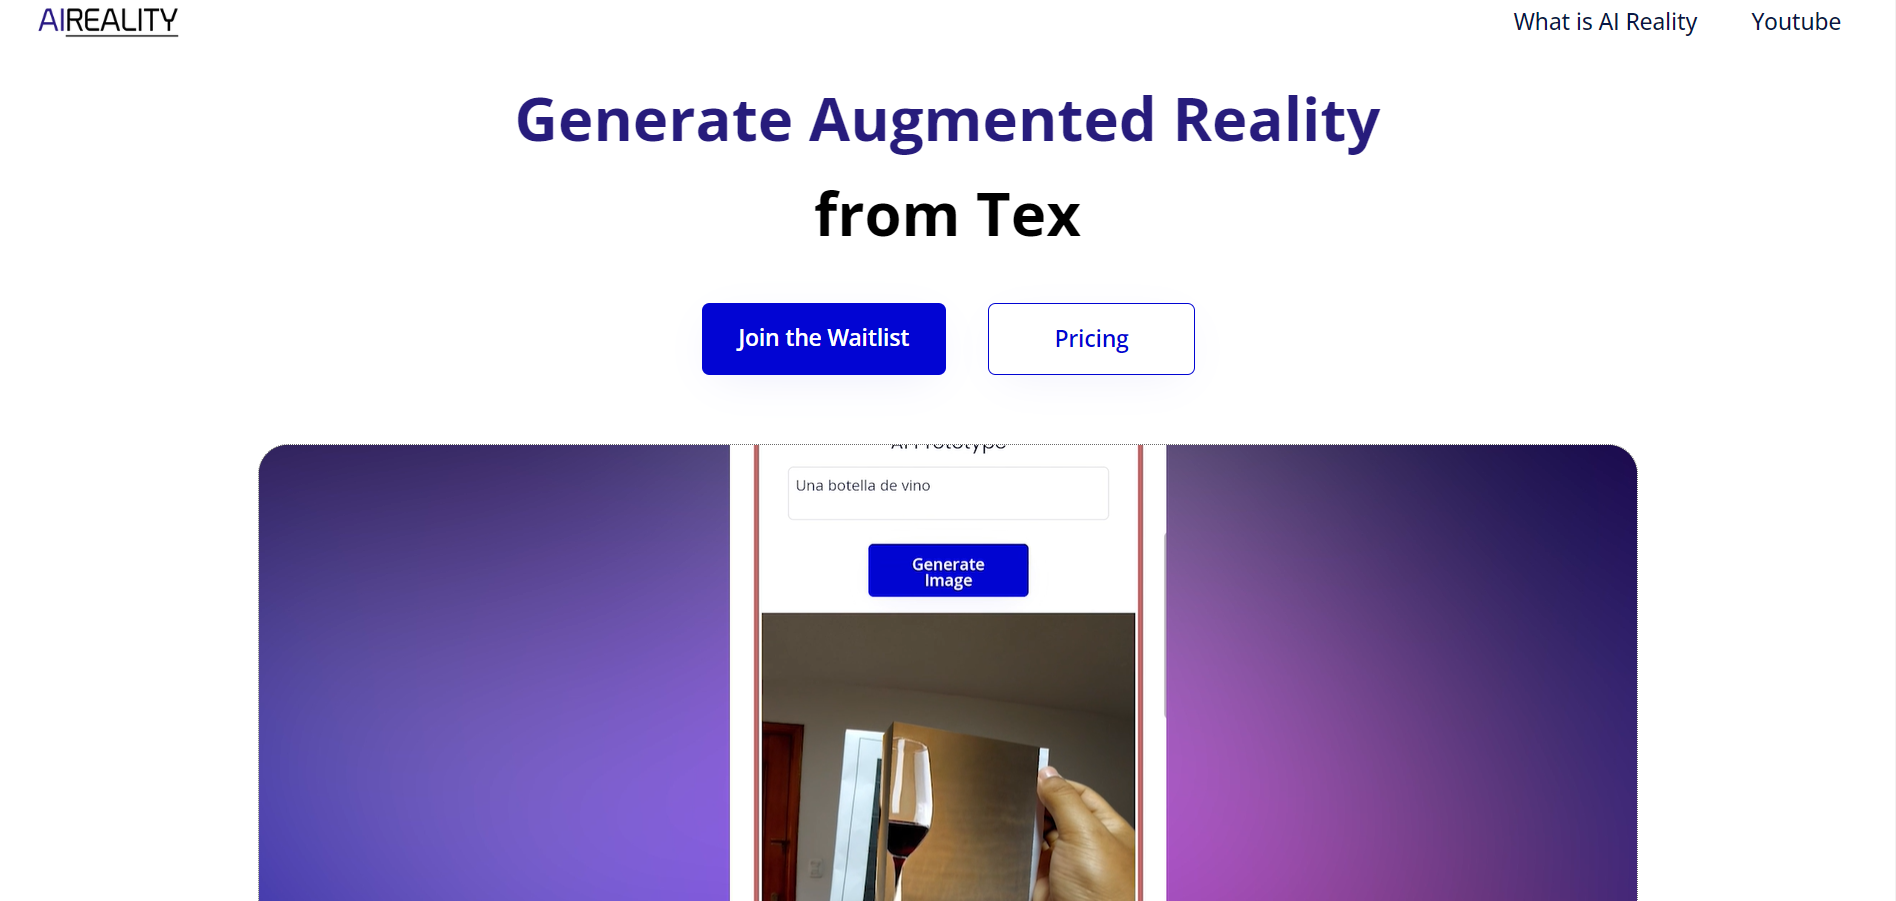 Unleash Your Inner Creator with AI Reality – The Ultimate Augmented Reality Tool!